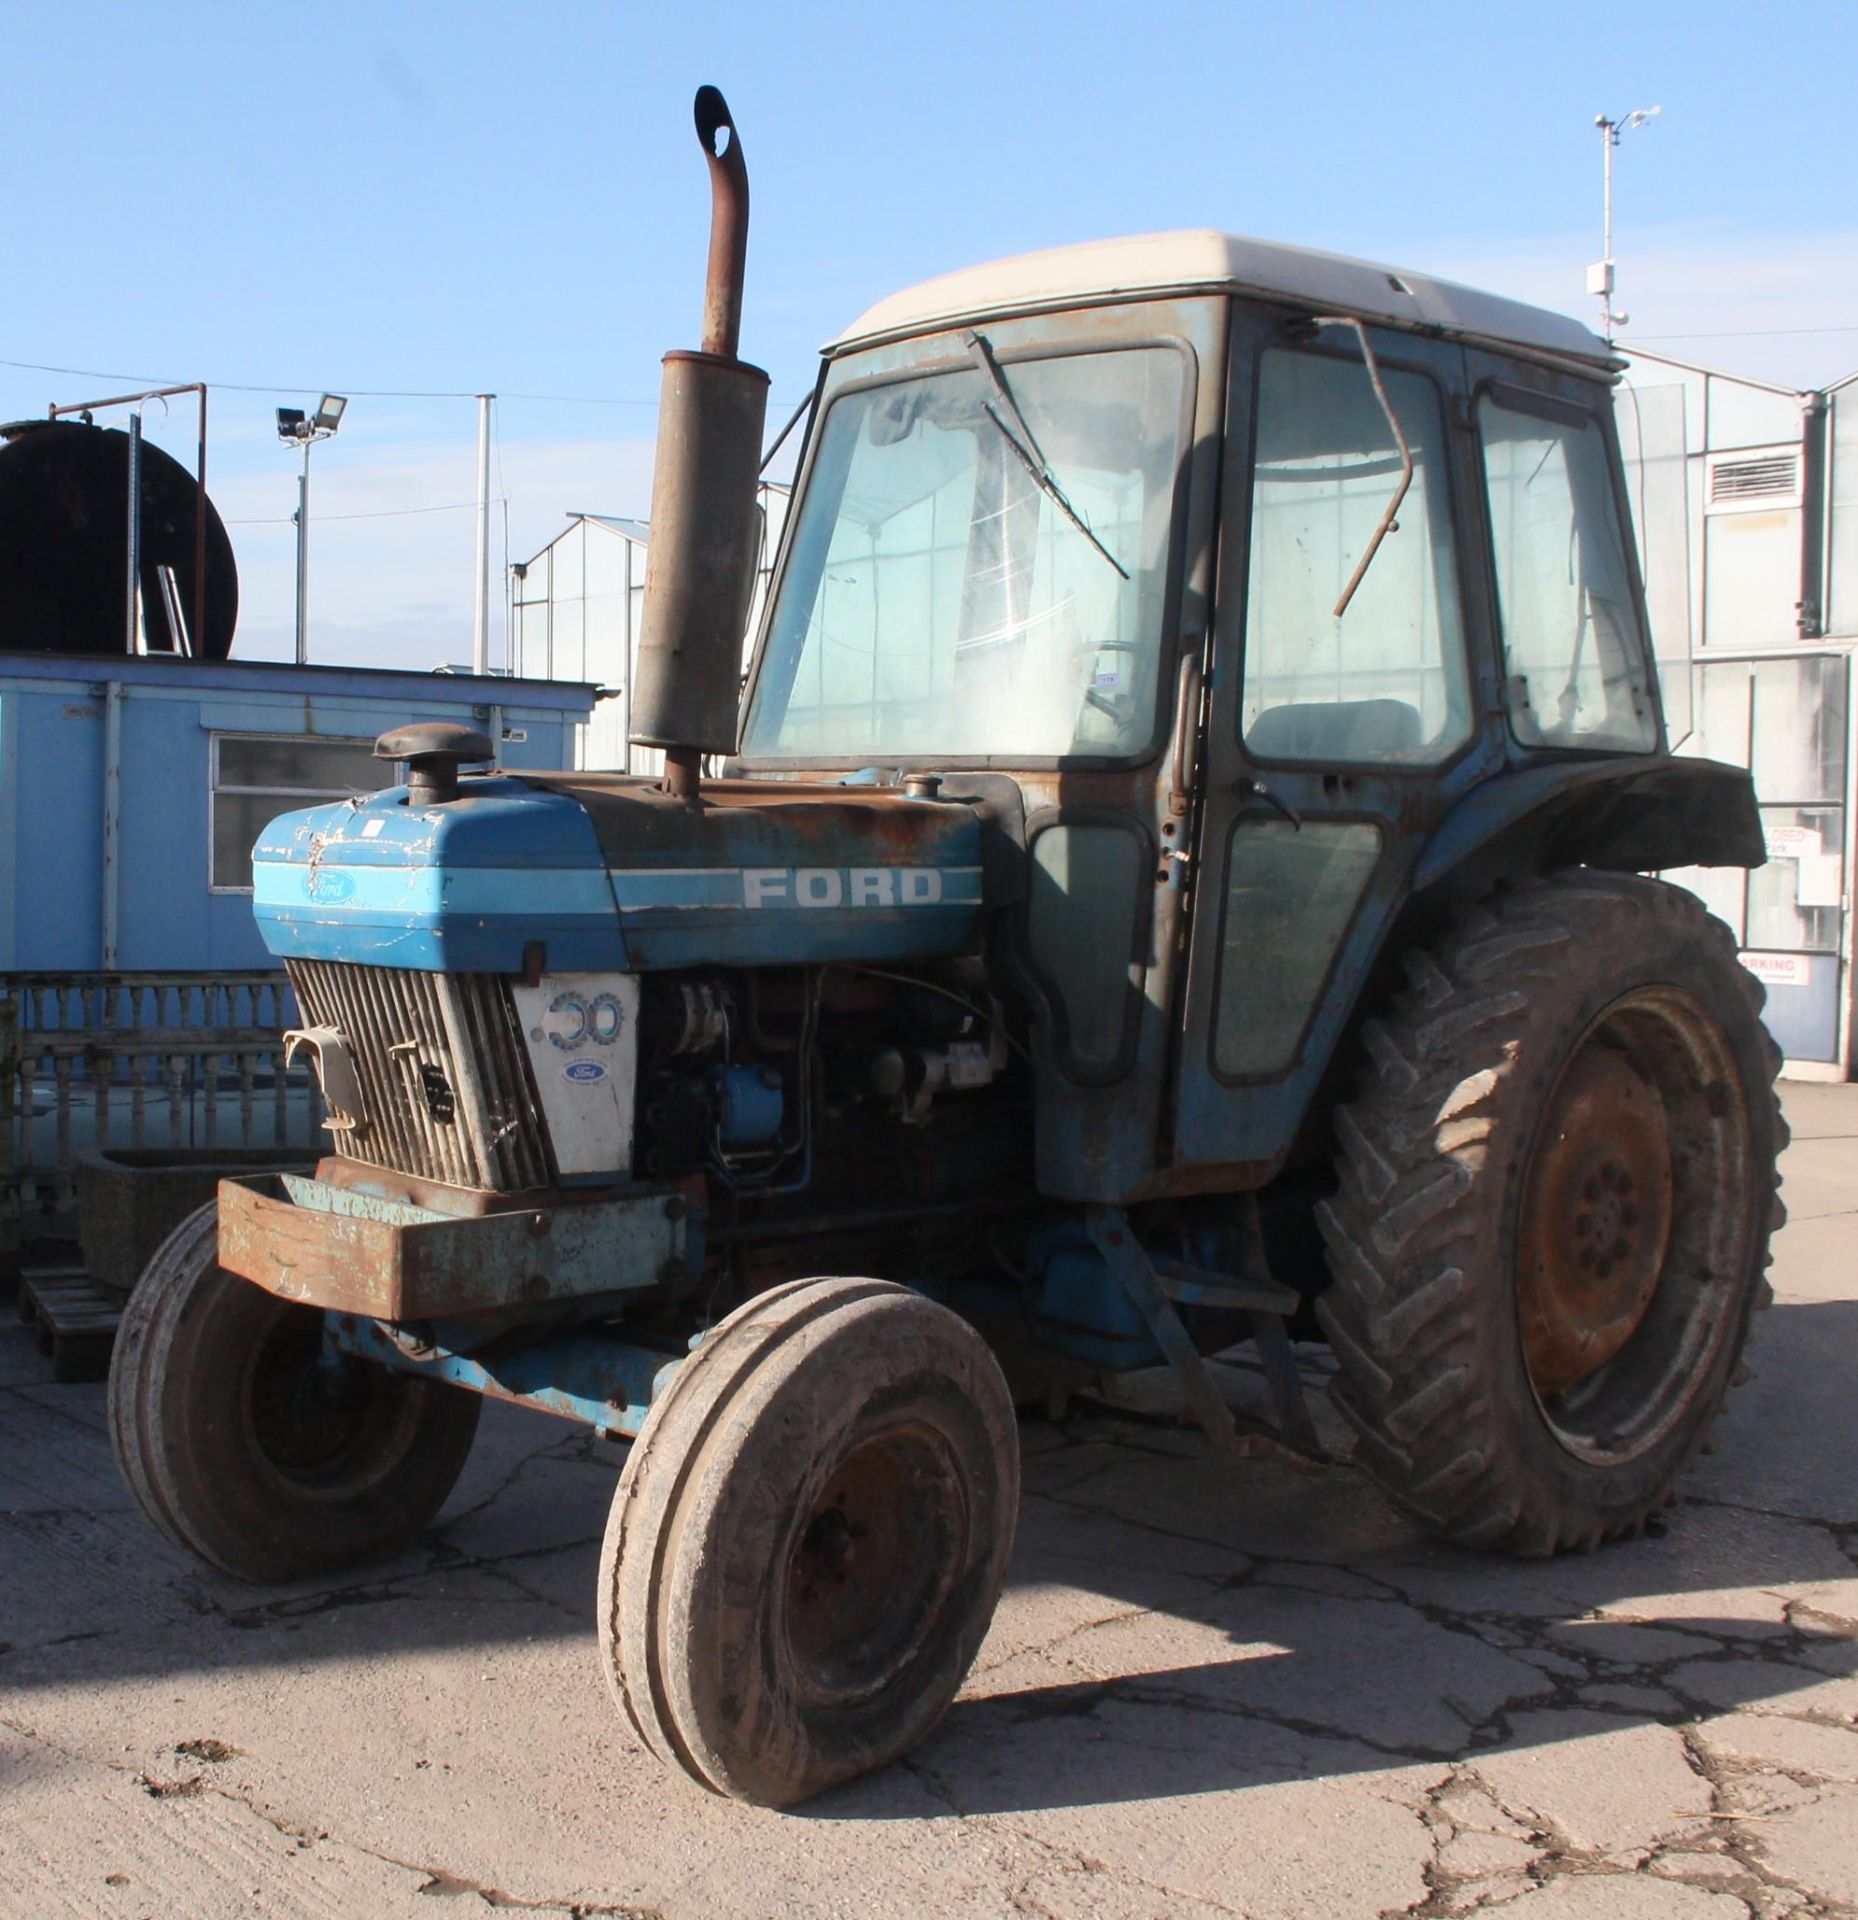 A FORD 6610 2 WHEEL DRIVE TRACTOR B287 YMA FIRST REG 04/01/85 WITH LOG BOOK WITH SPARE REAR